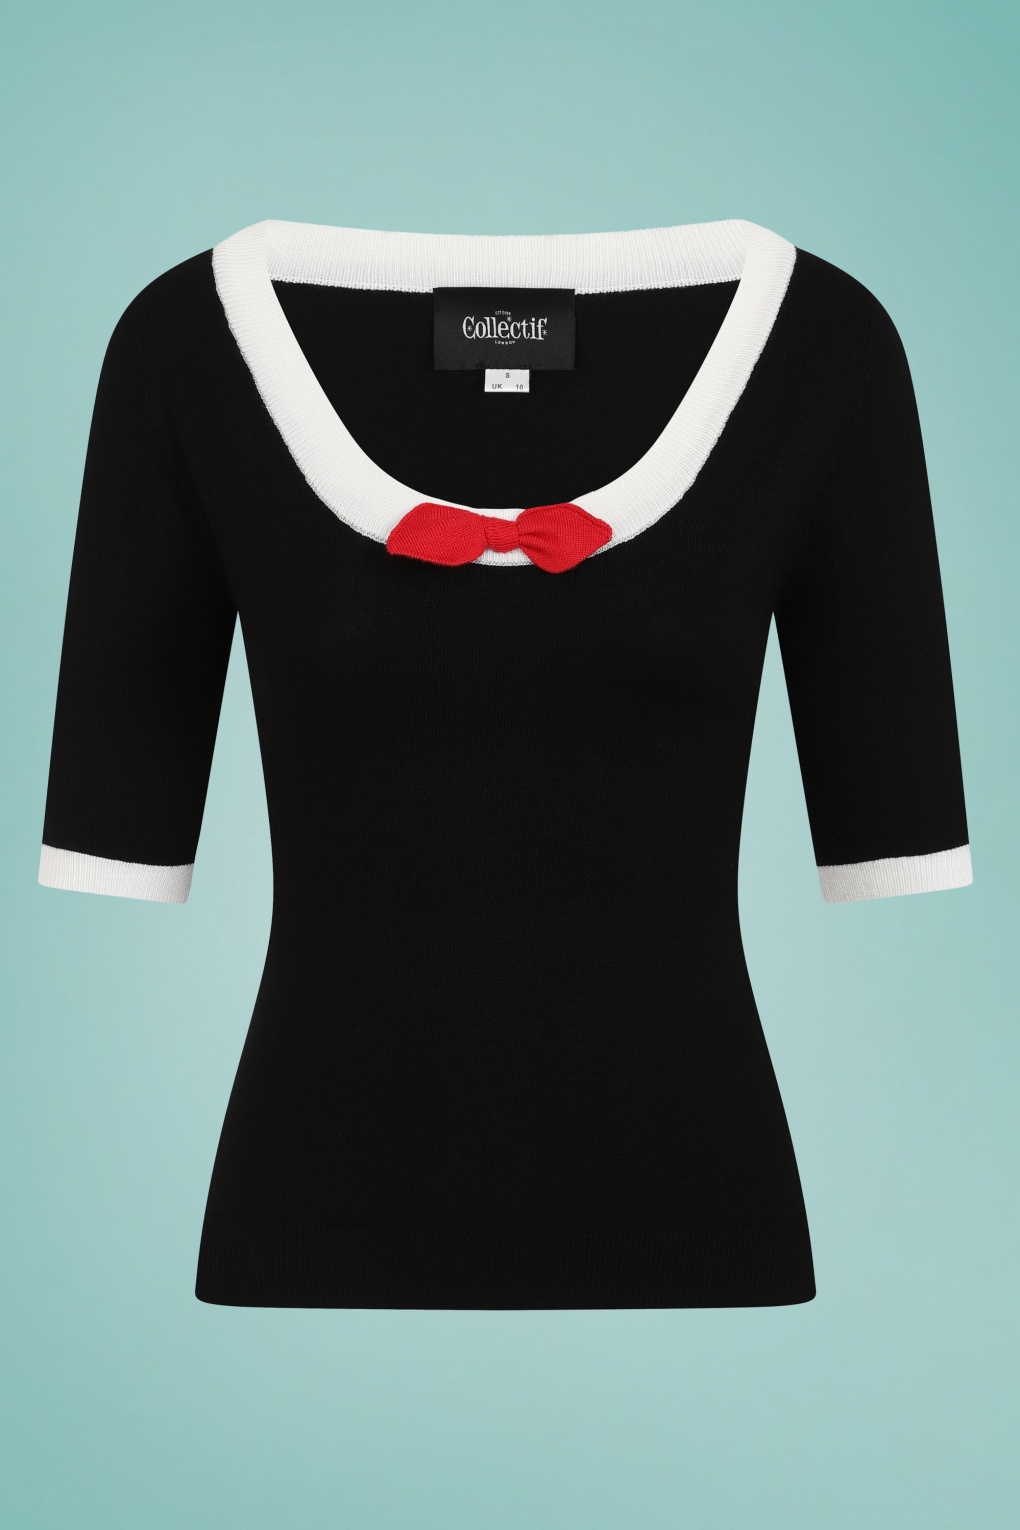 Collectif Clothing | 50s Freya Knitted Top in Black and Red